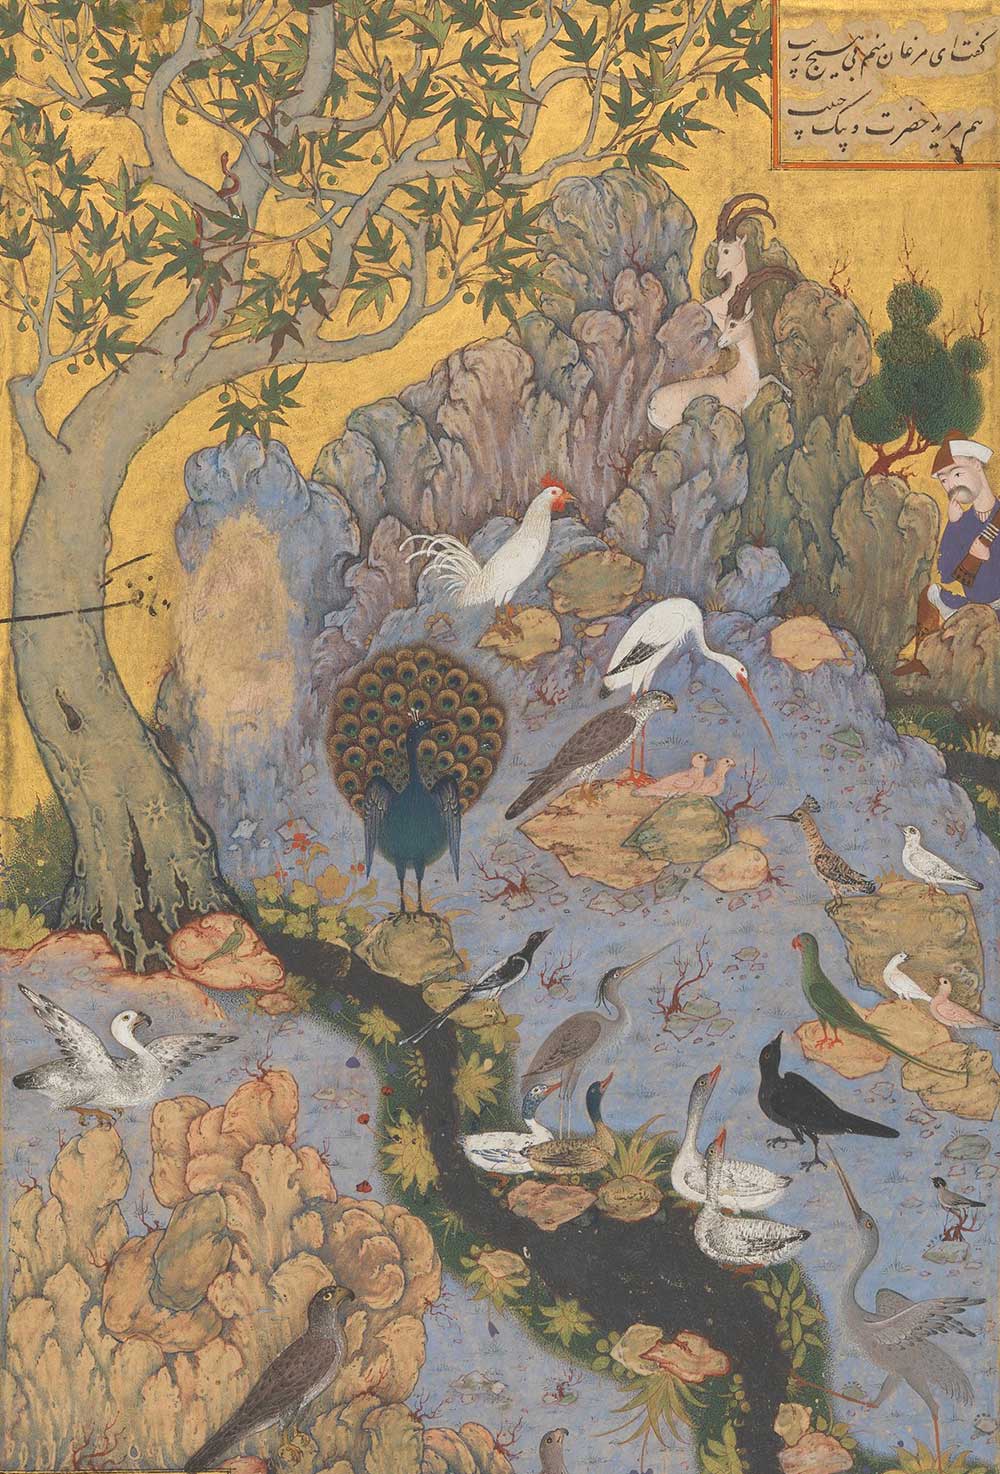 Gathering of birds around a stream and under a tree with a peacock in the center